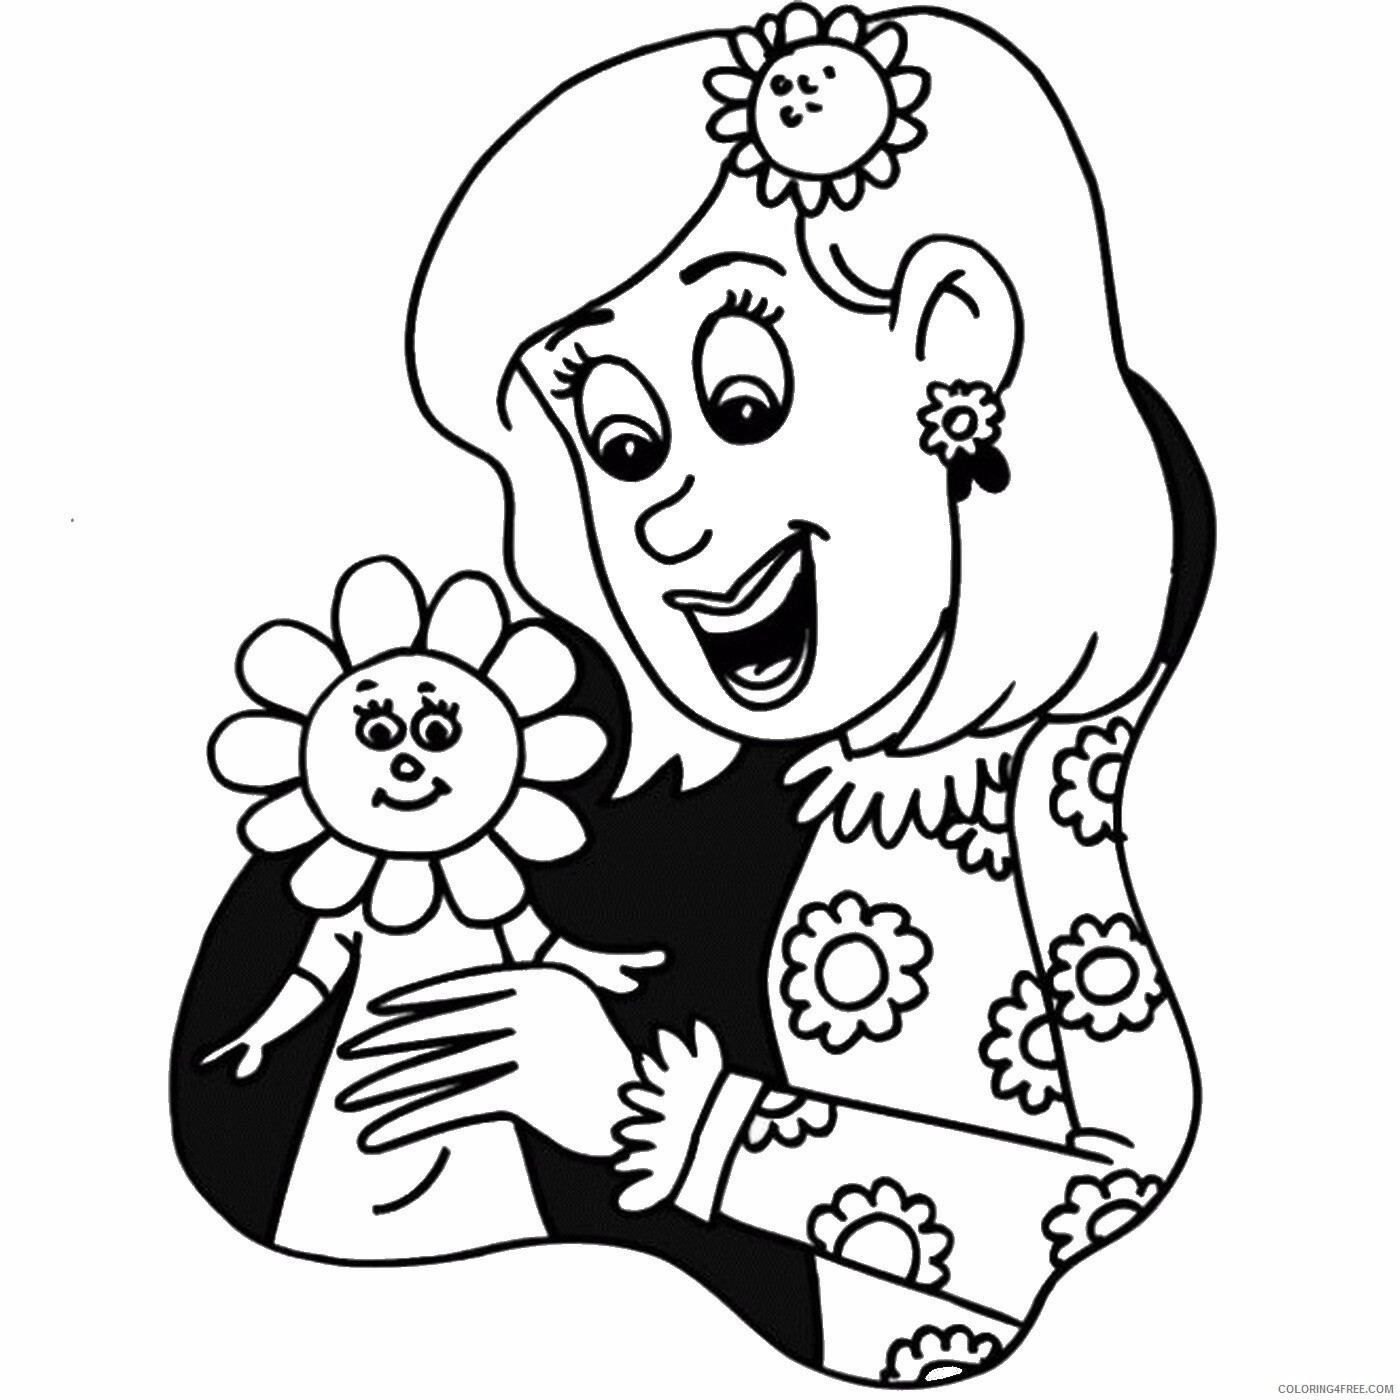 Doll Coloring Pages for Girls dolls_28 Printable 2021 0379 Coloring4free